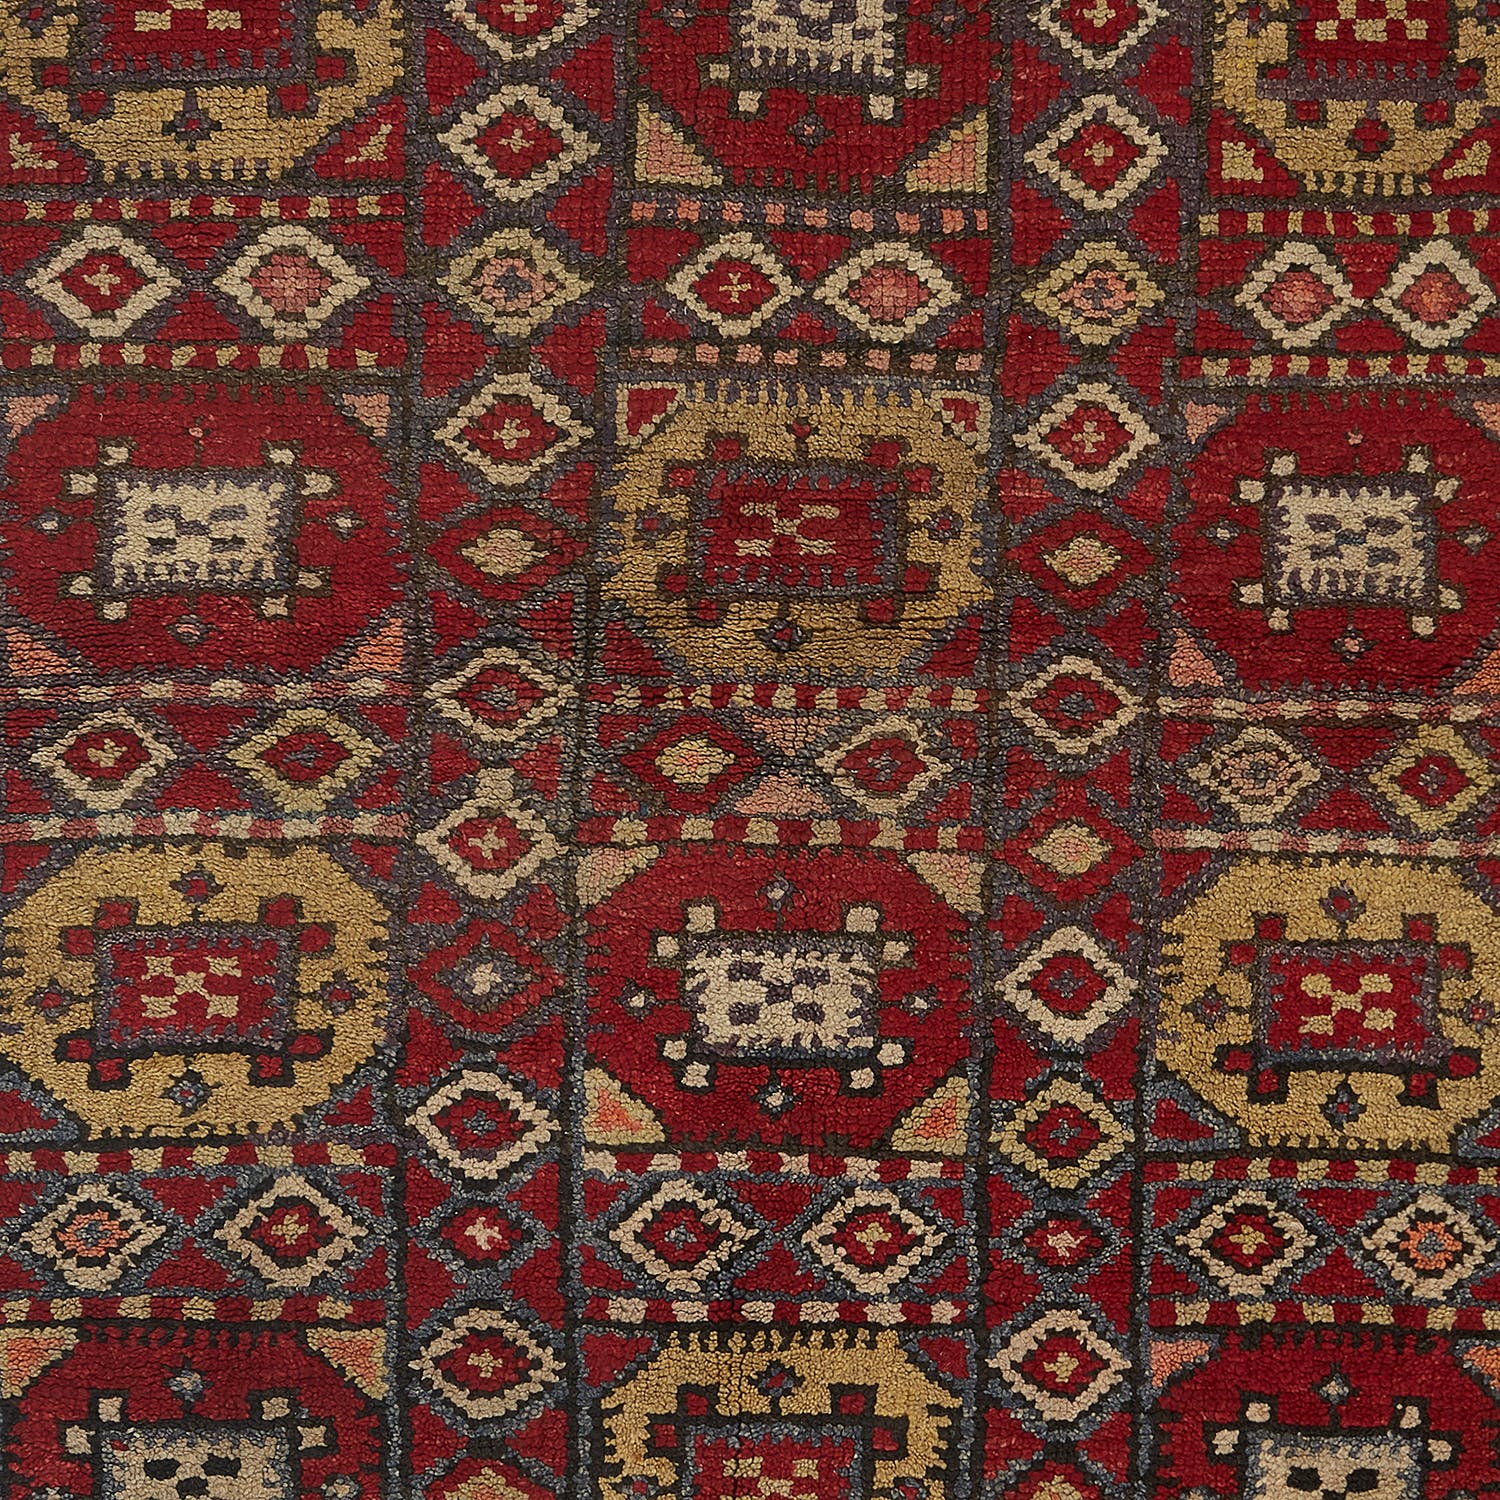 Richly patterned hand-woven rug with traditional motifs from a cultural region.